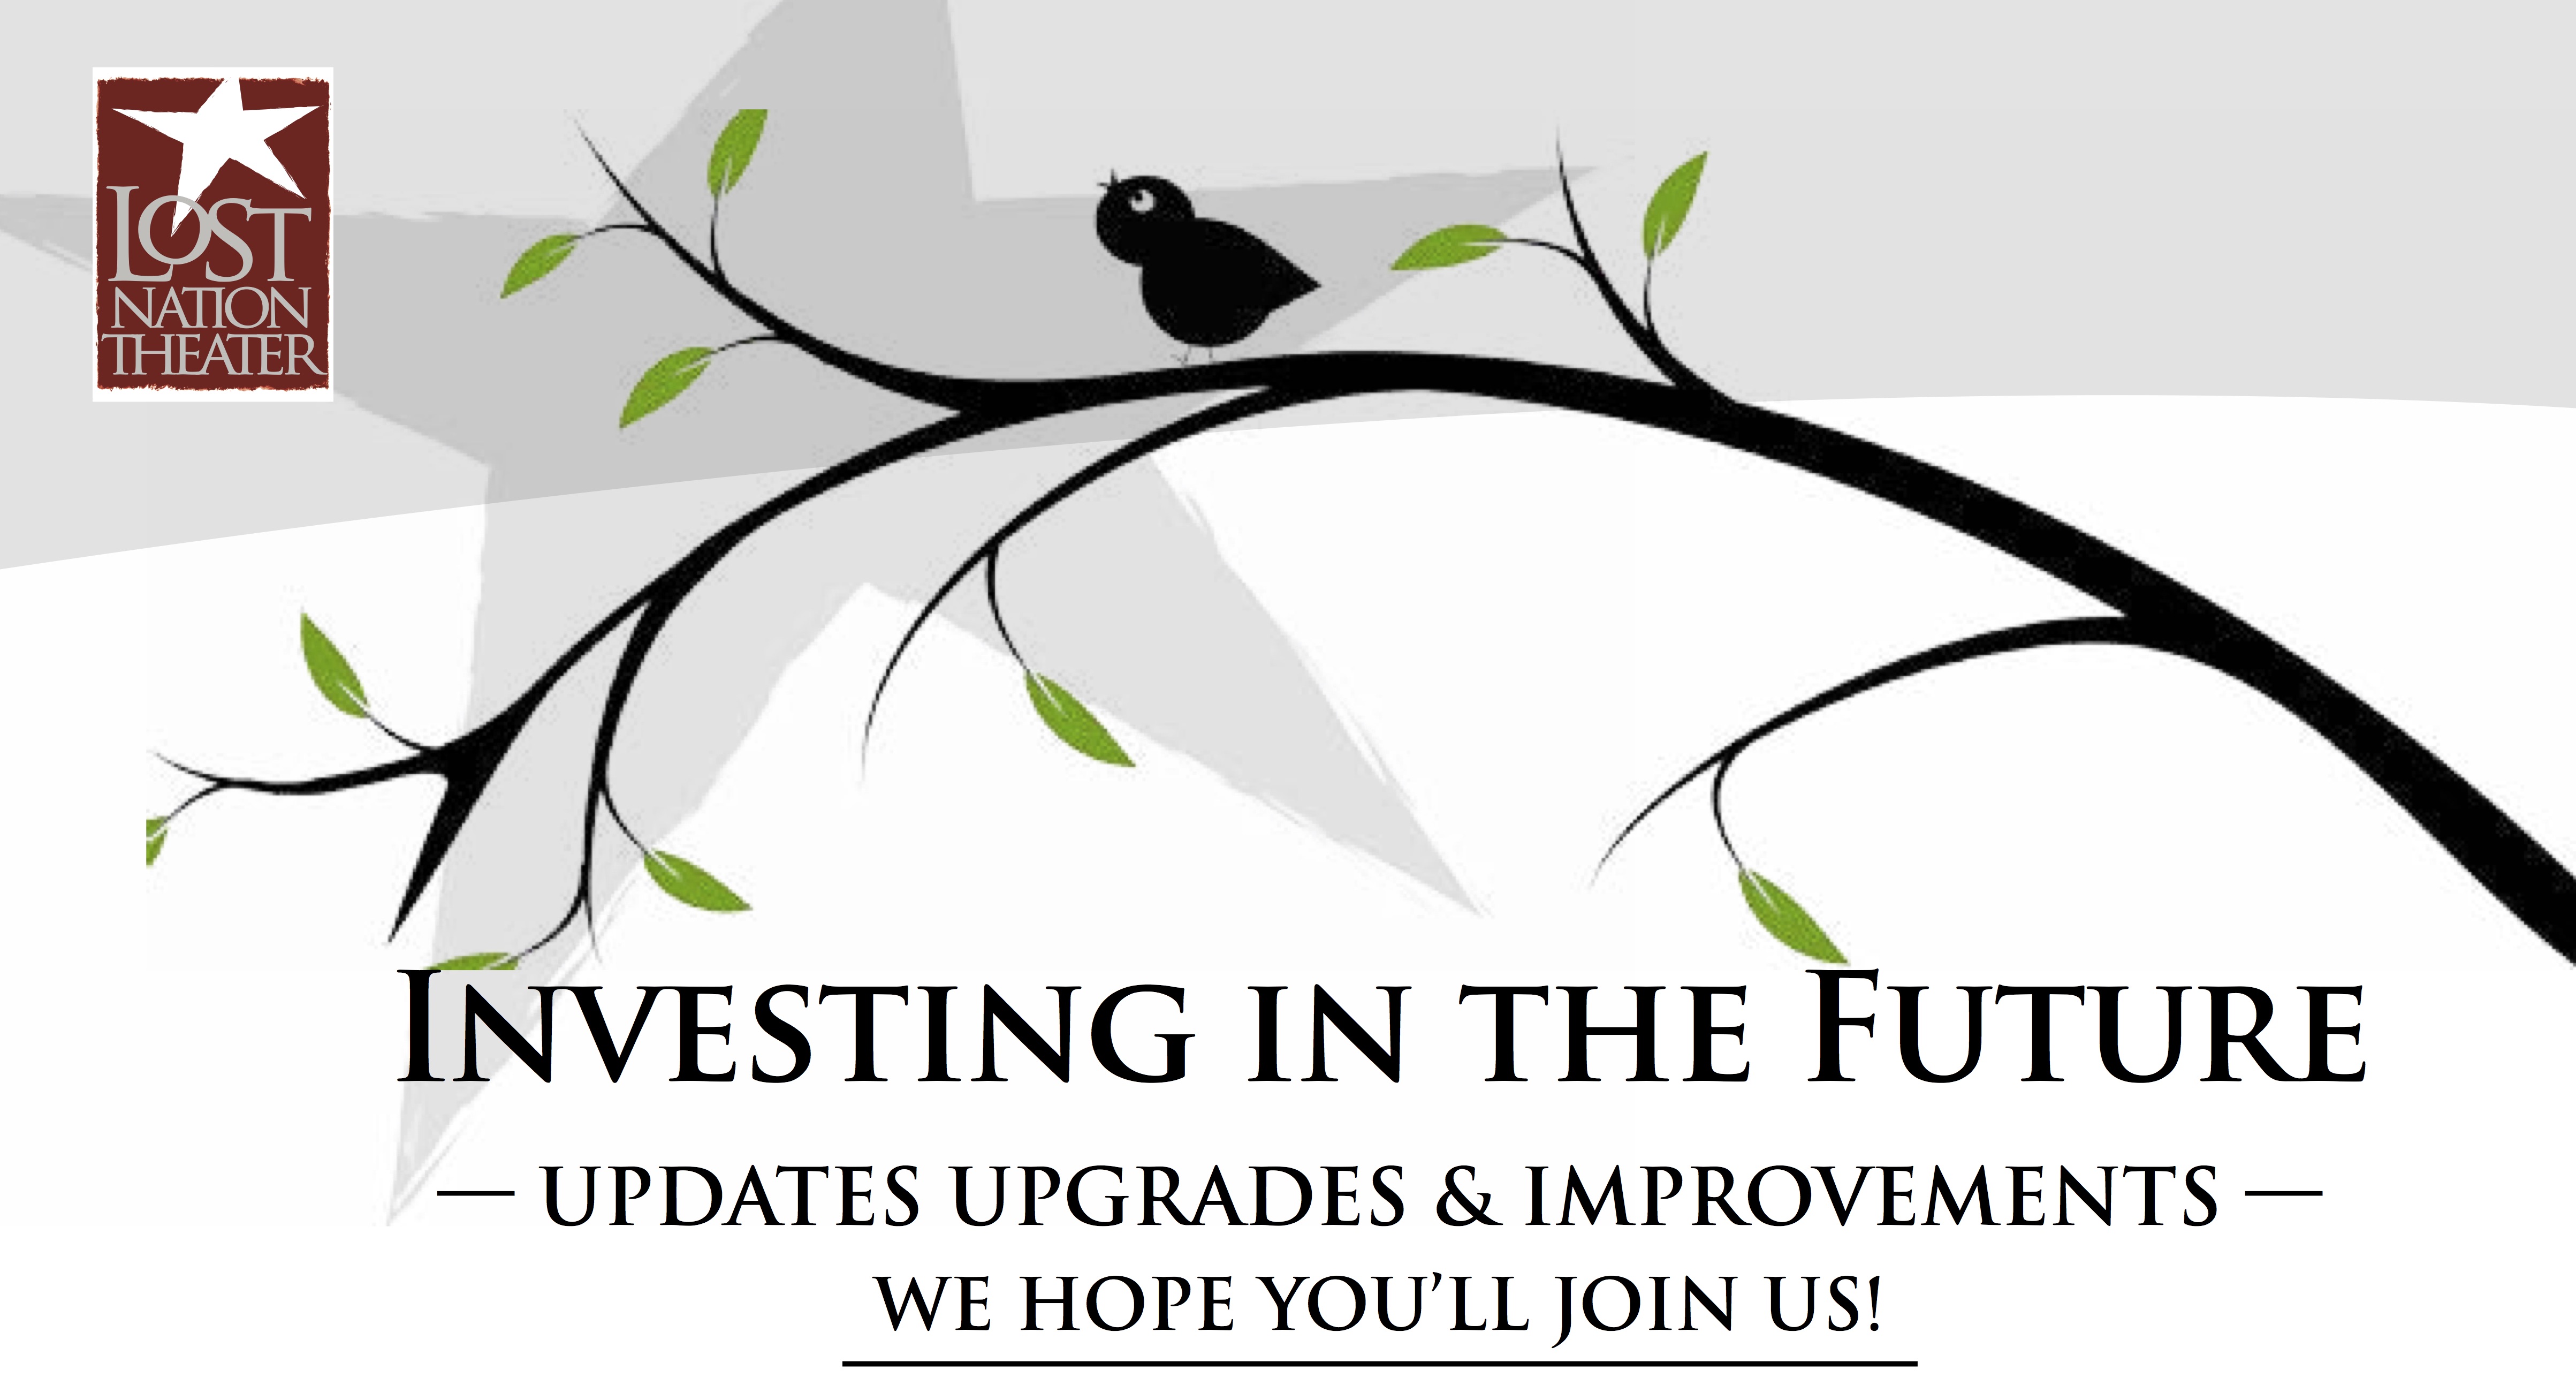 invest in LNT's future birds on tree branch graphic